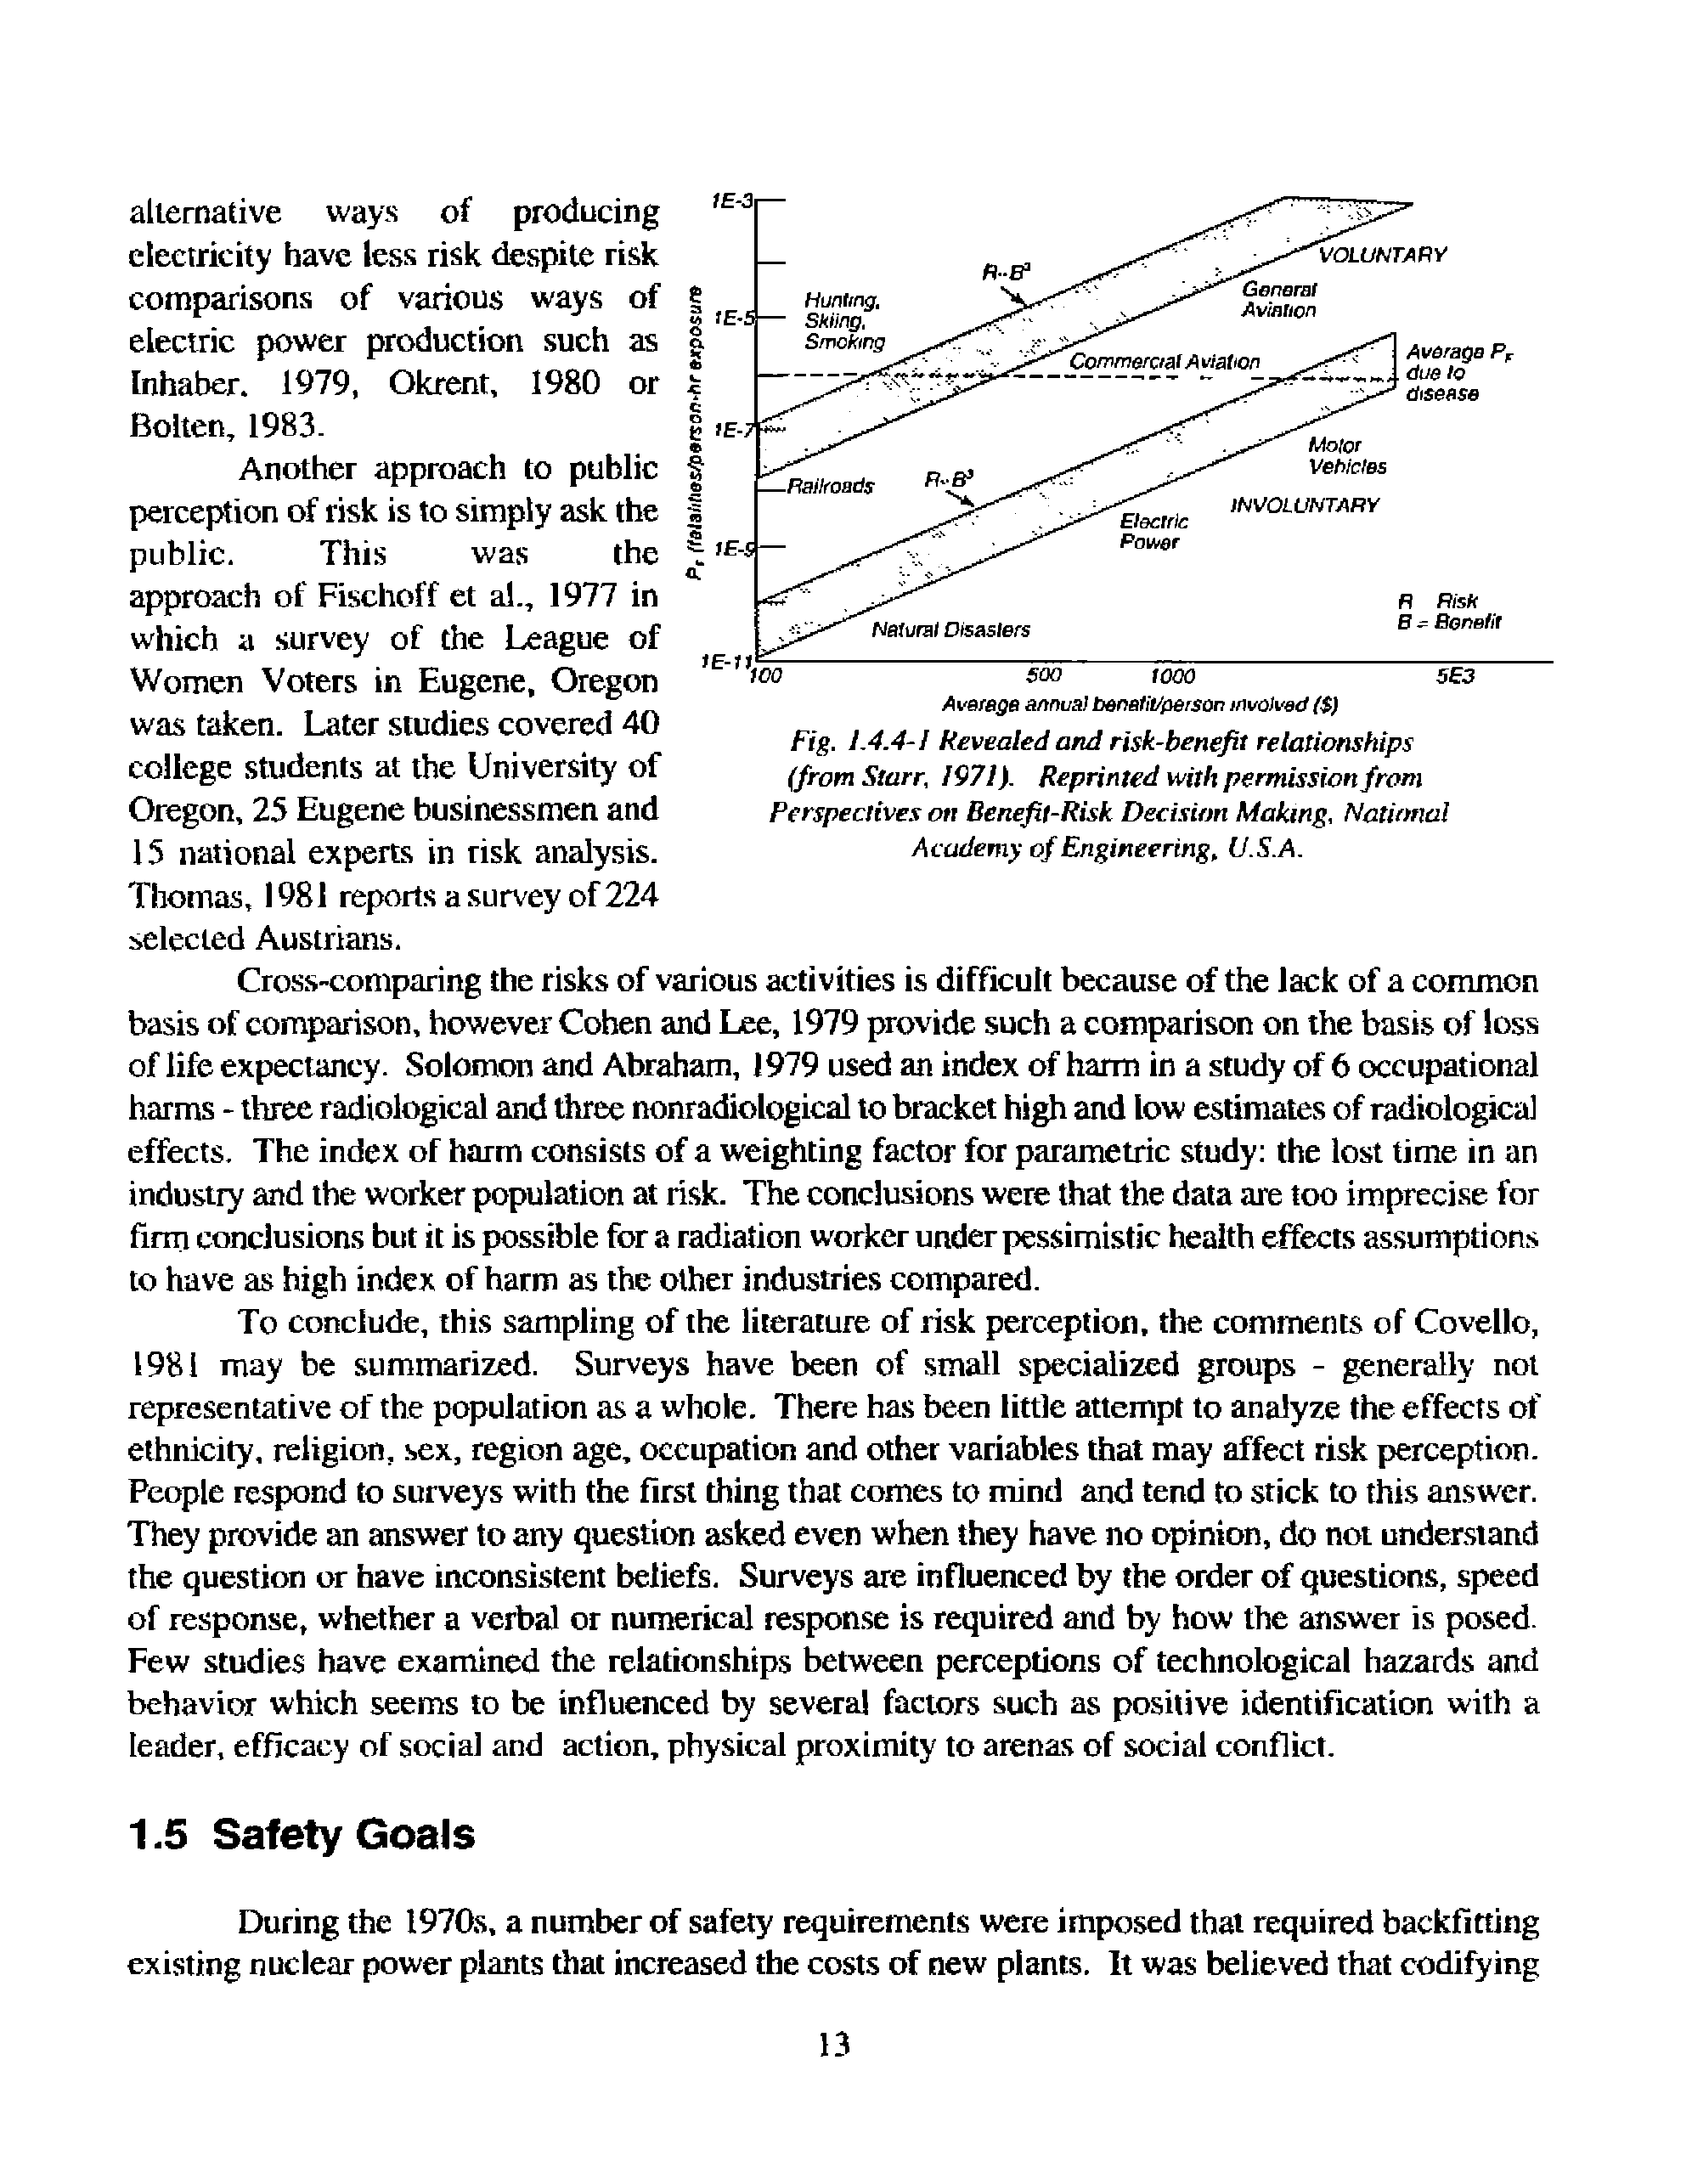 Fig. 1.4.4-1 Revealed and risk-benefit relationships (from Starr, 1971). Reprinted with permission from Perspectives on Benefit-Risk. Decision Malang, National Academy of Engineering, U.S.A.